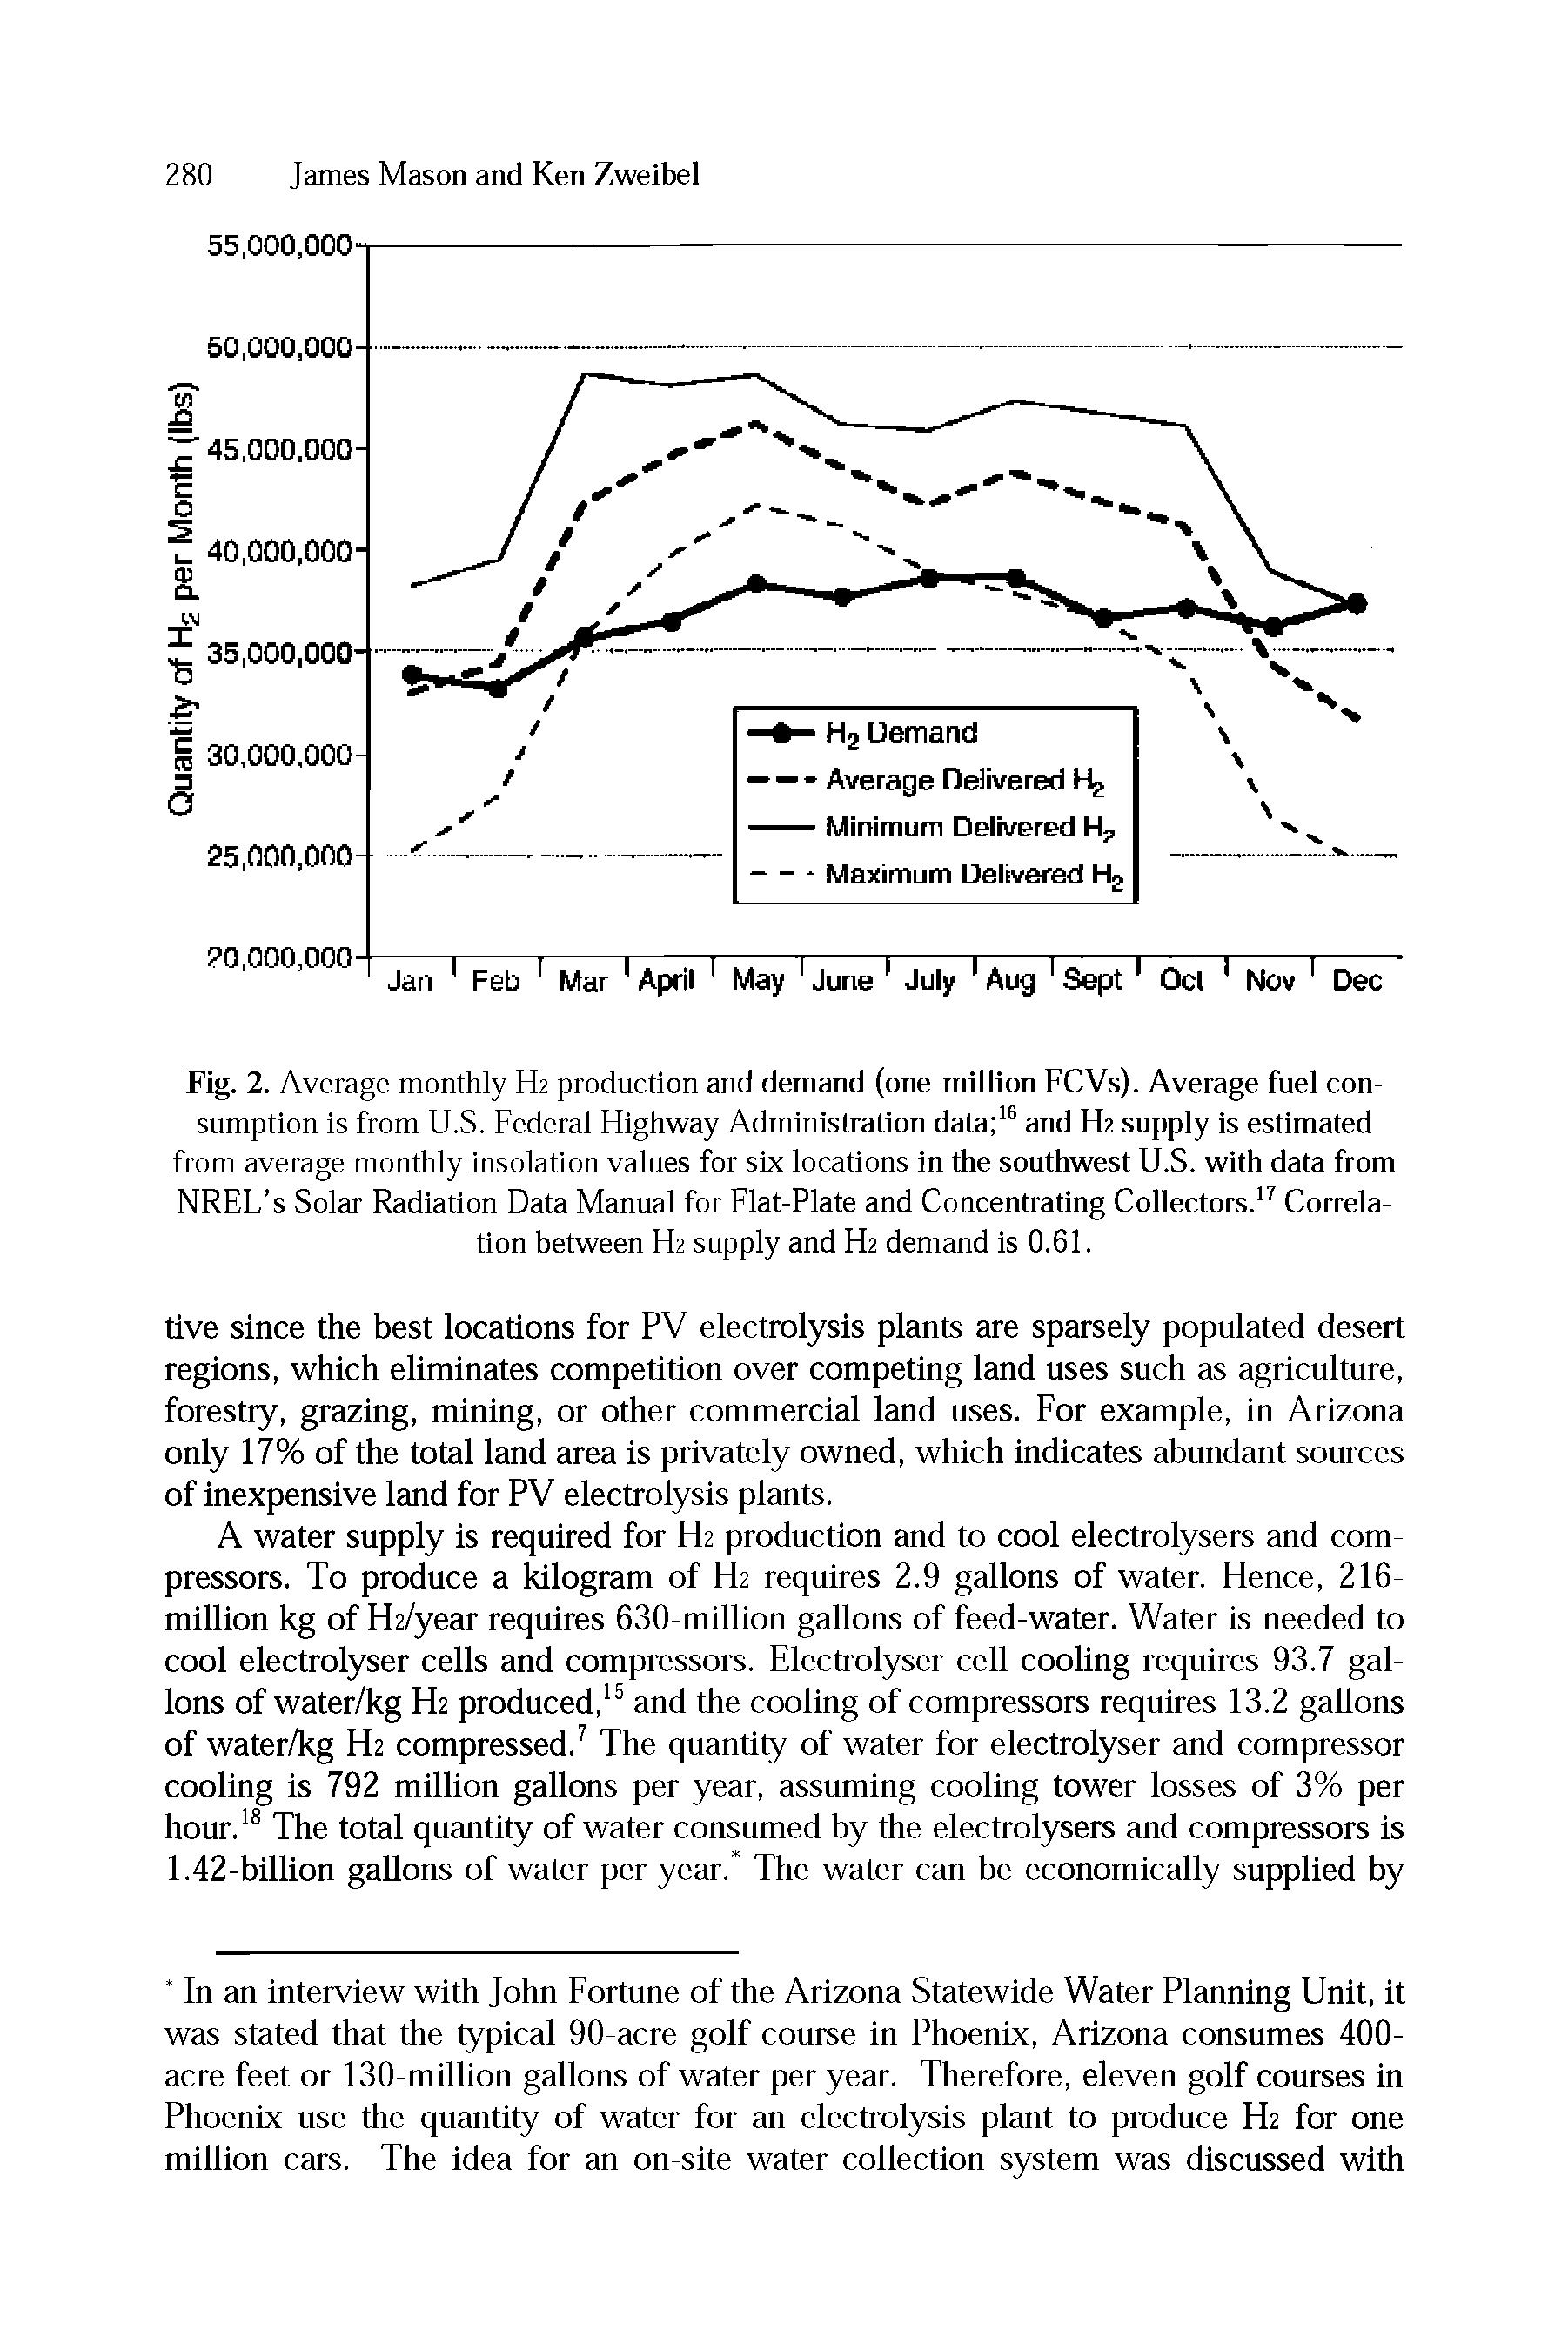 Fig. 2. Average monthly H2 production and demand (one-million FCVs). Average fuel consumption is from U.S. Federal Highway Administration data 16 and H2 supply is estimated from average monthly insolation values for six locations in the southwest U.S. with data from NREL s Solar Radiation Data Manual for Flat-Plate and Concentrating Collectors.17 Correlation between H2 supply and H2 demand is 0.61.